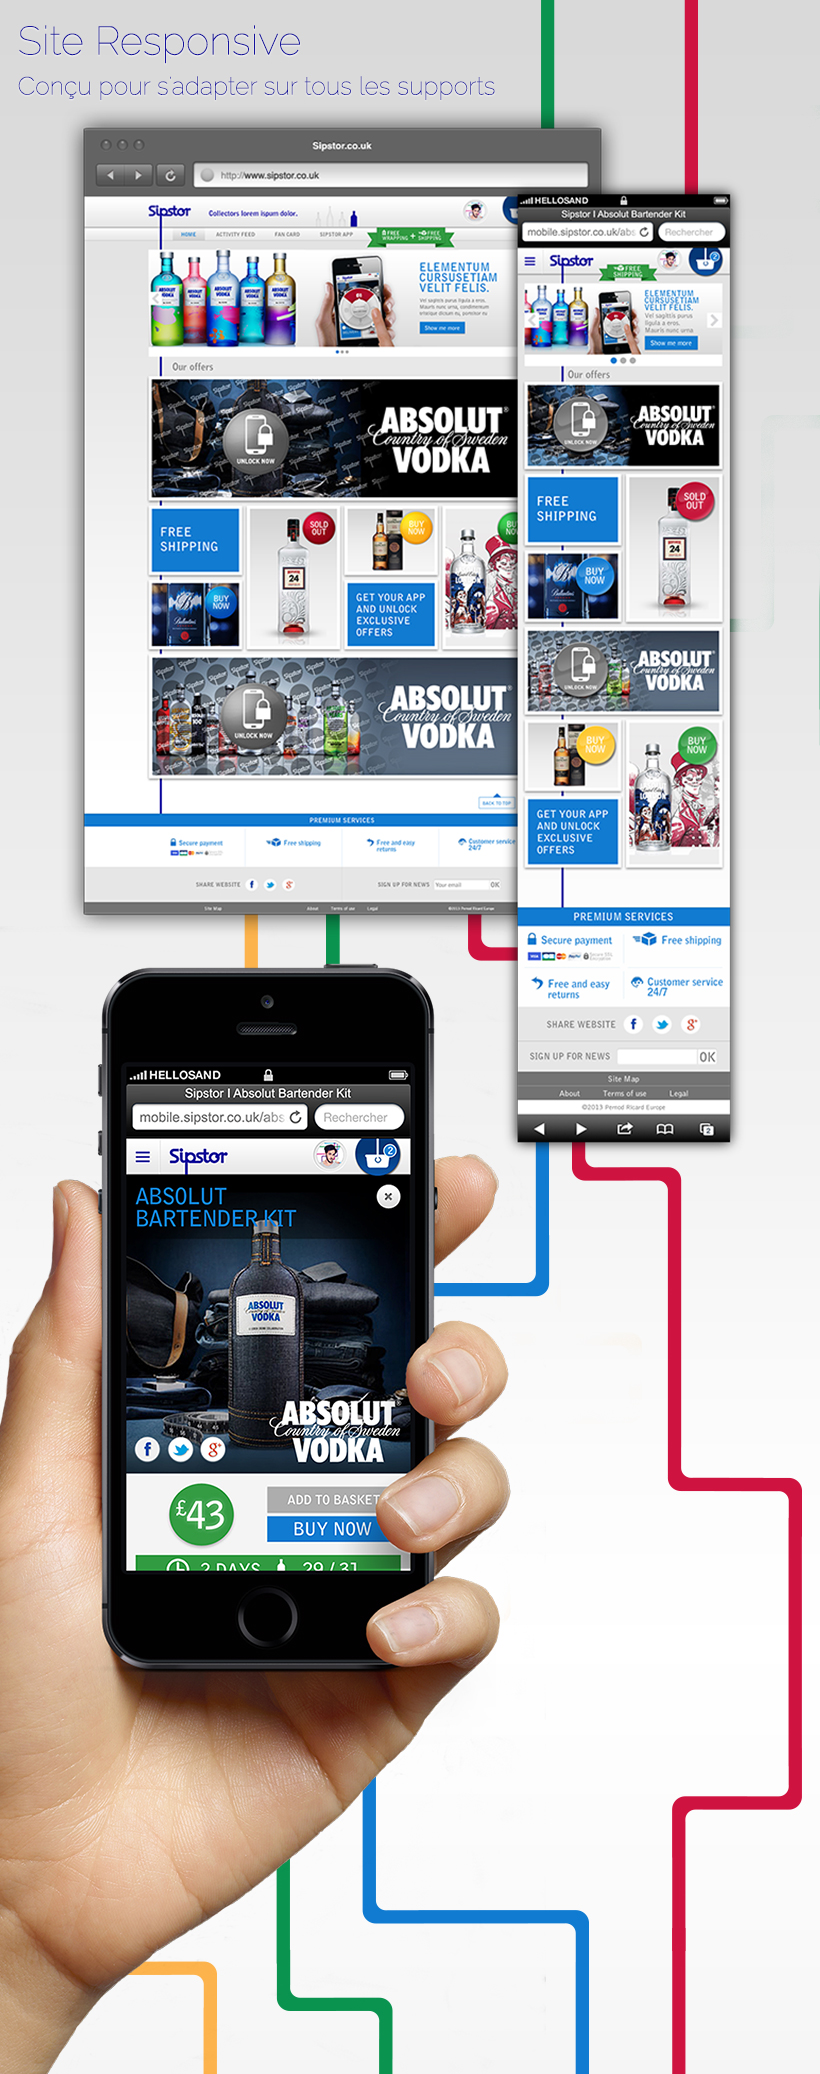 Sipstor // Pernod // Application, Site ecommerce, Site mobile // Full Responsive 